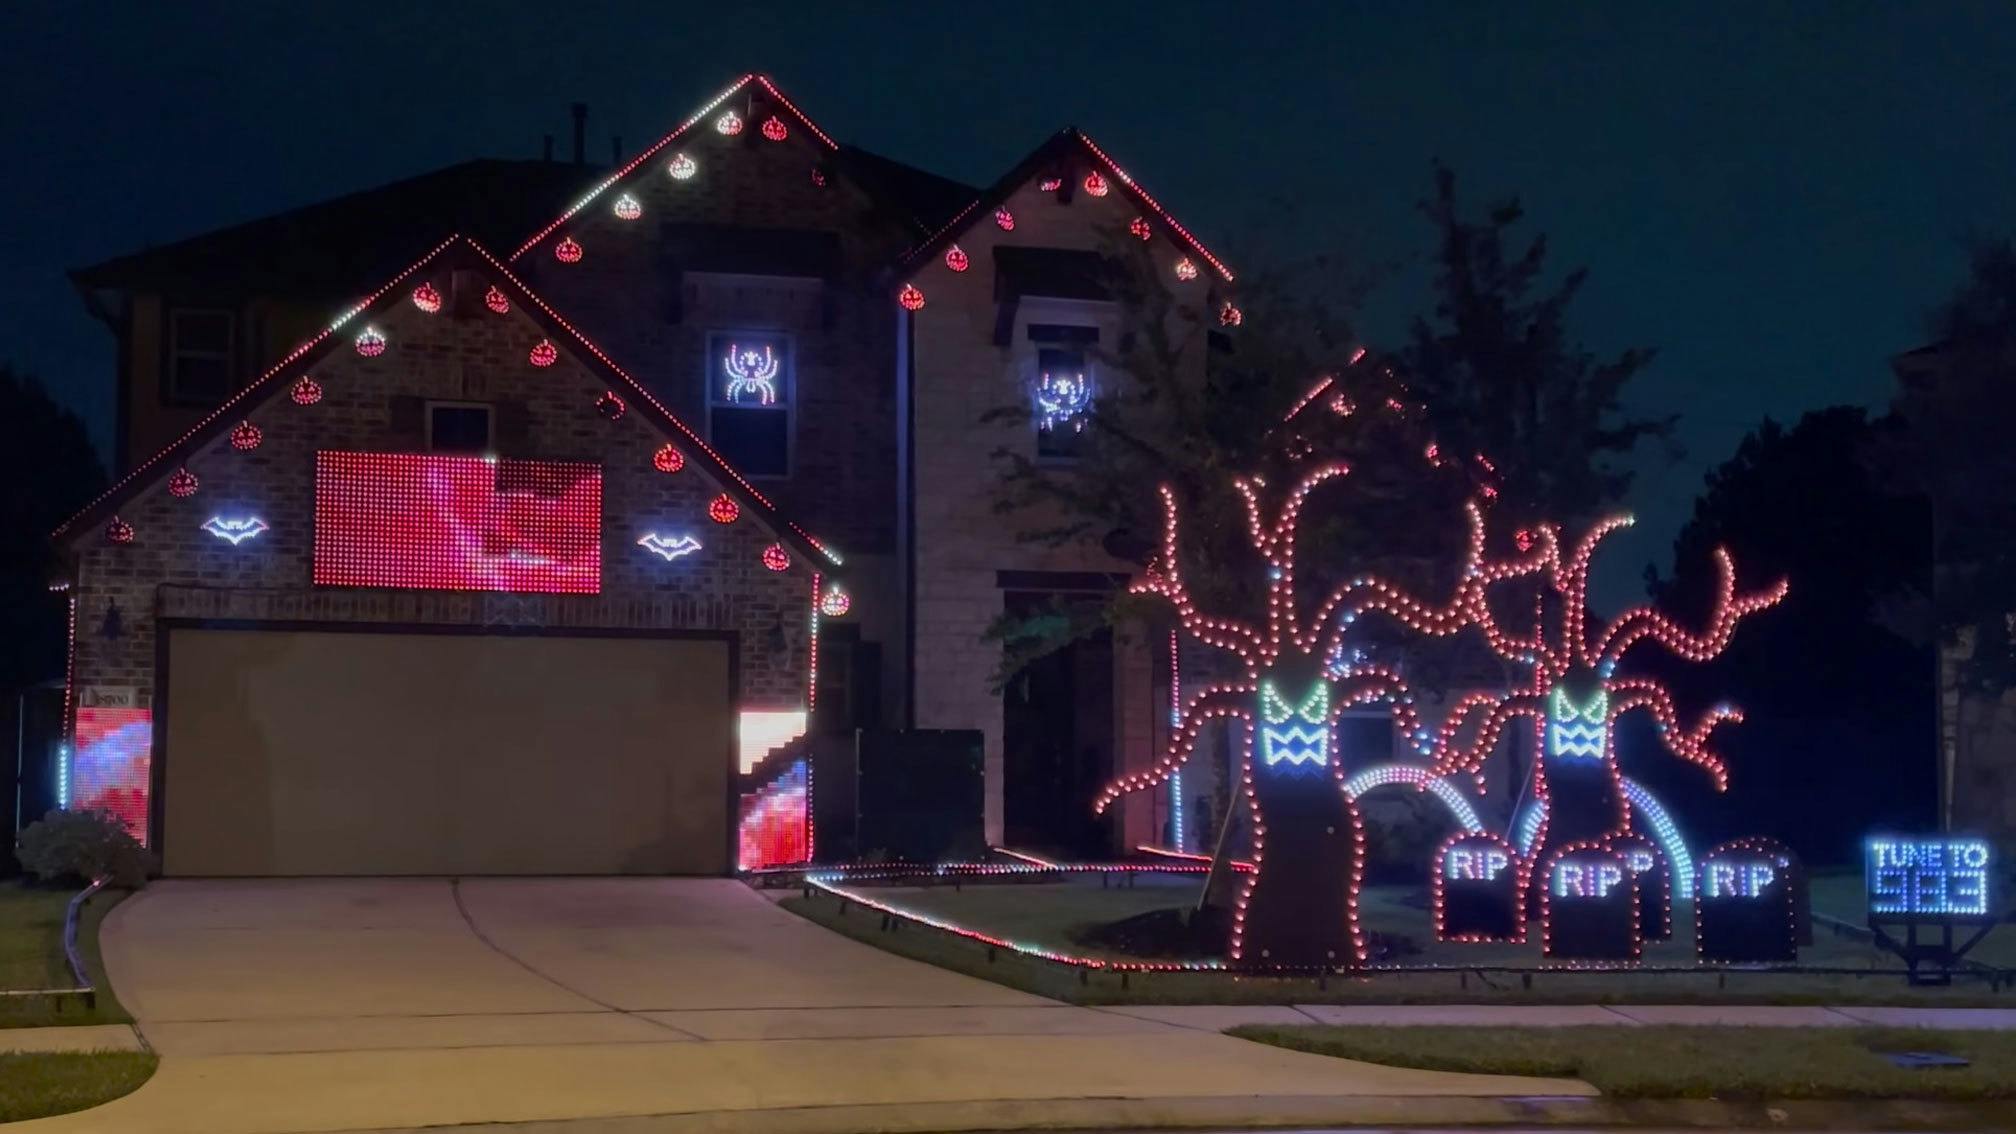 Nightmare come true: This Avenged Sevenfold Halloween light show absolutely rules